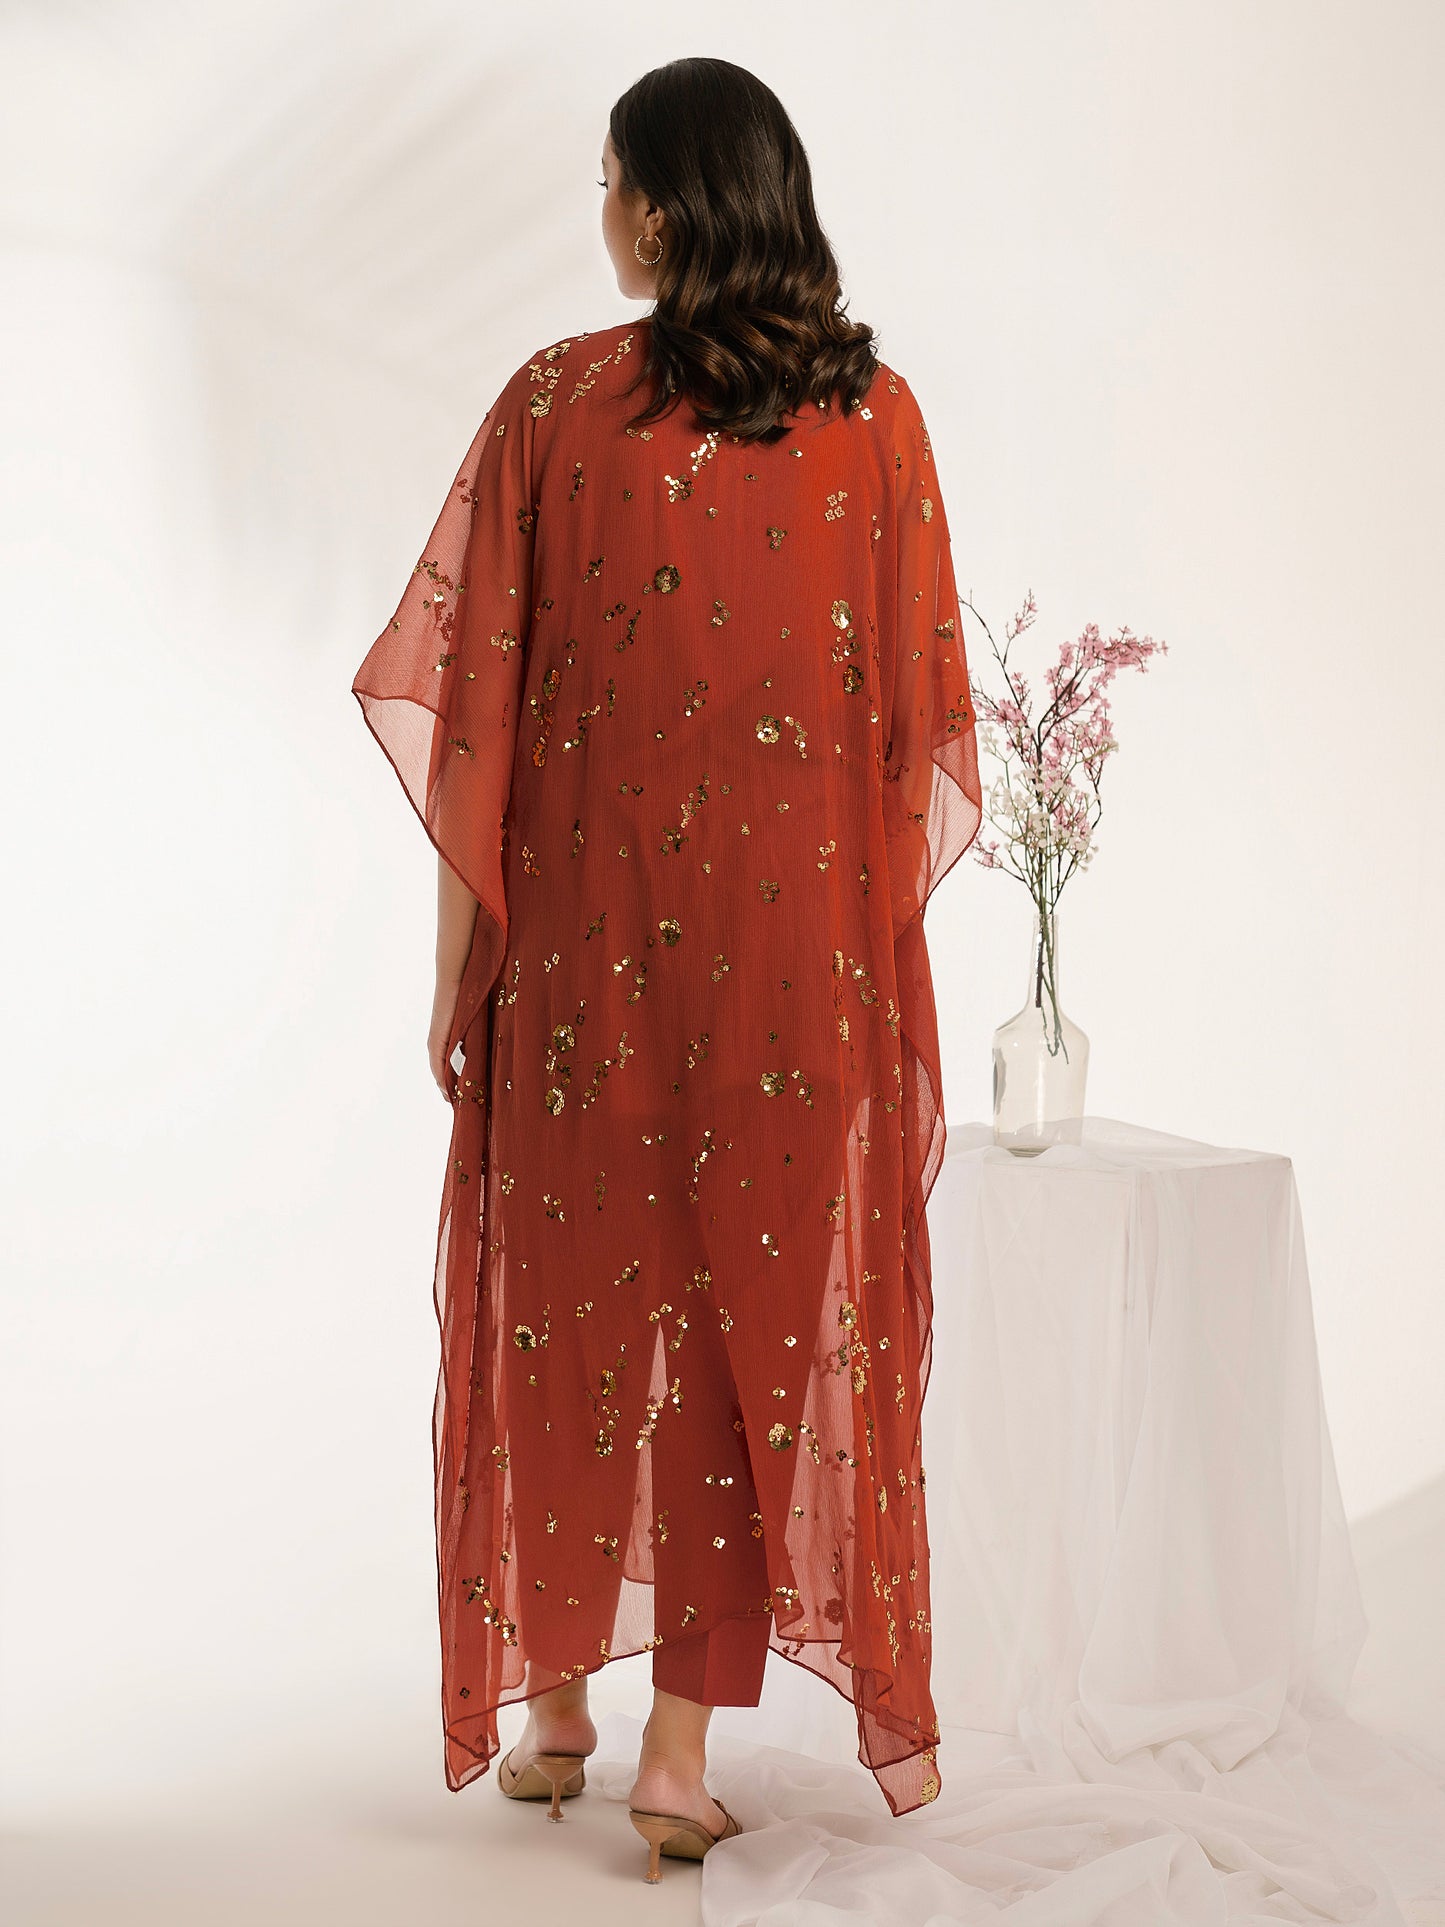 2 Piece Chiffon Suit-Embroidered (Pret)